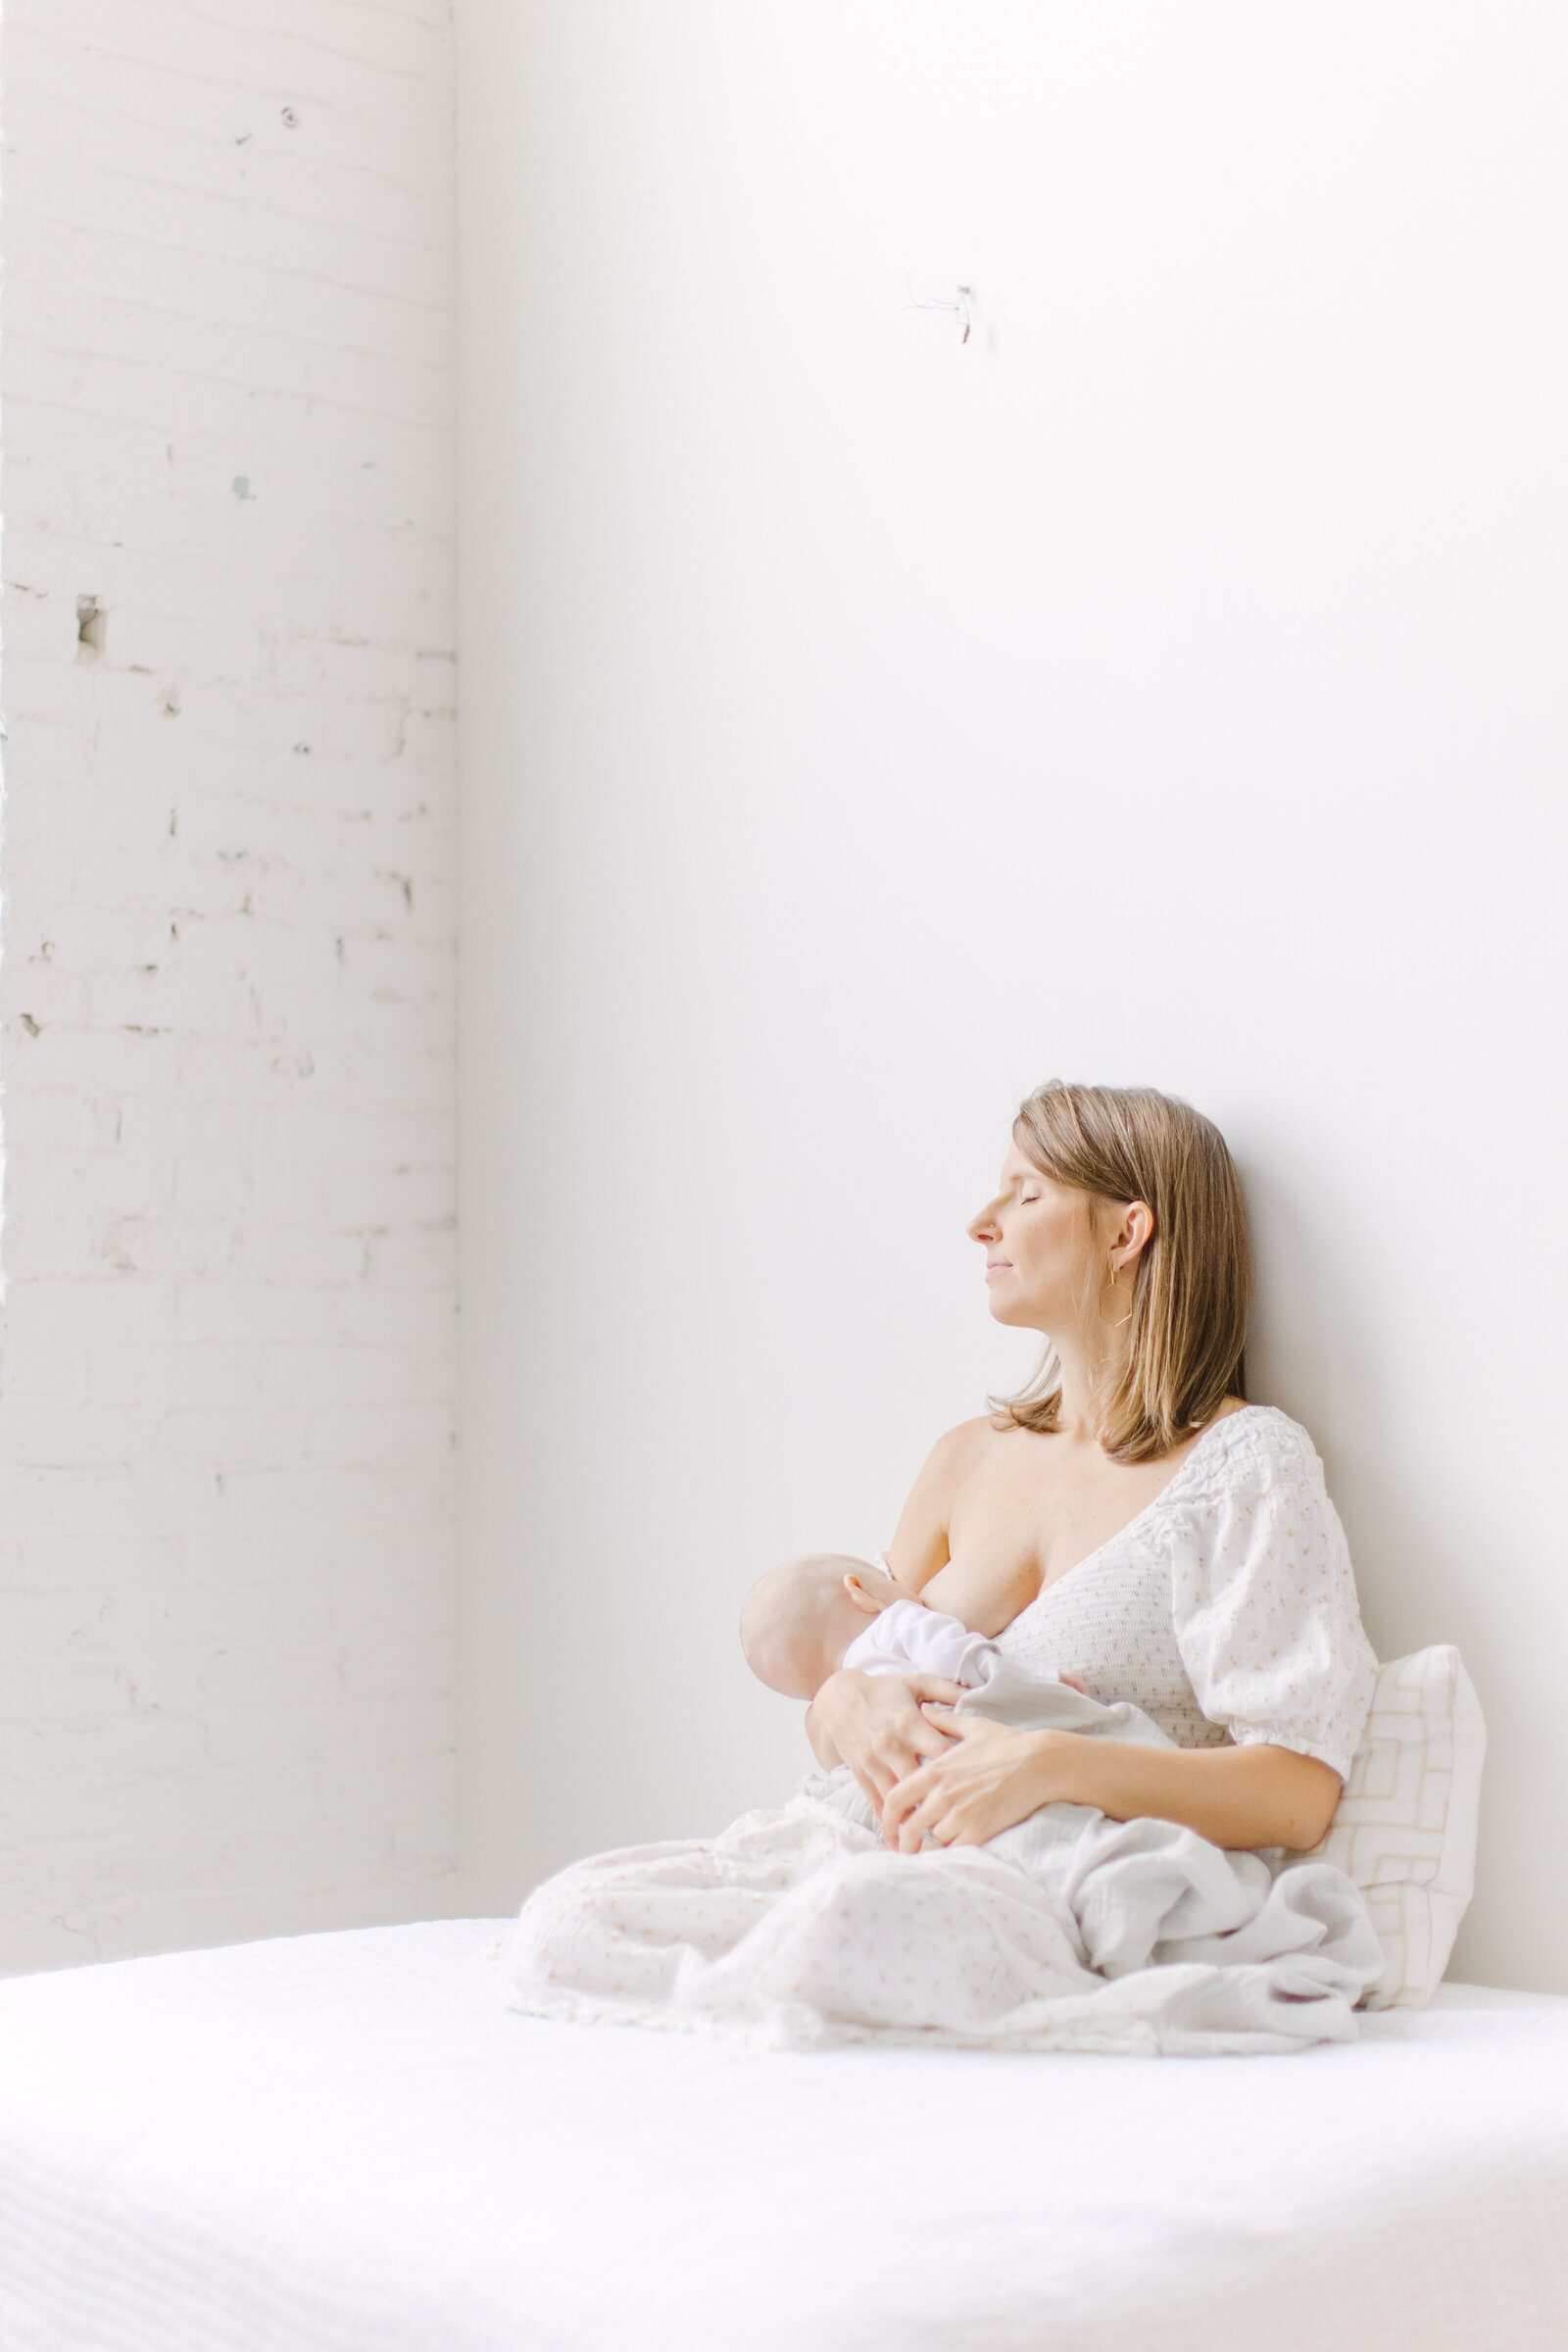 A new mother is breastfeeding her baby while sitting on a white bed in a photo studio in the boston area